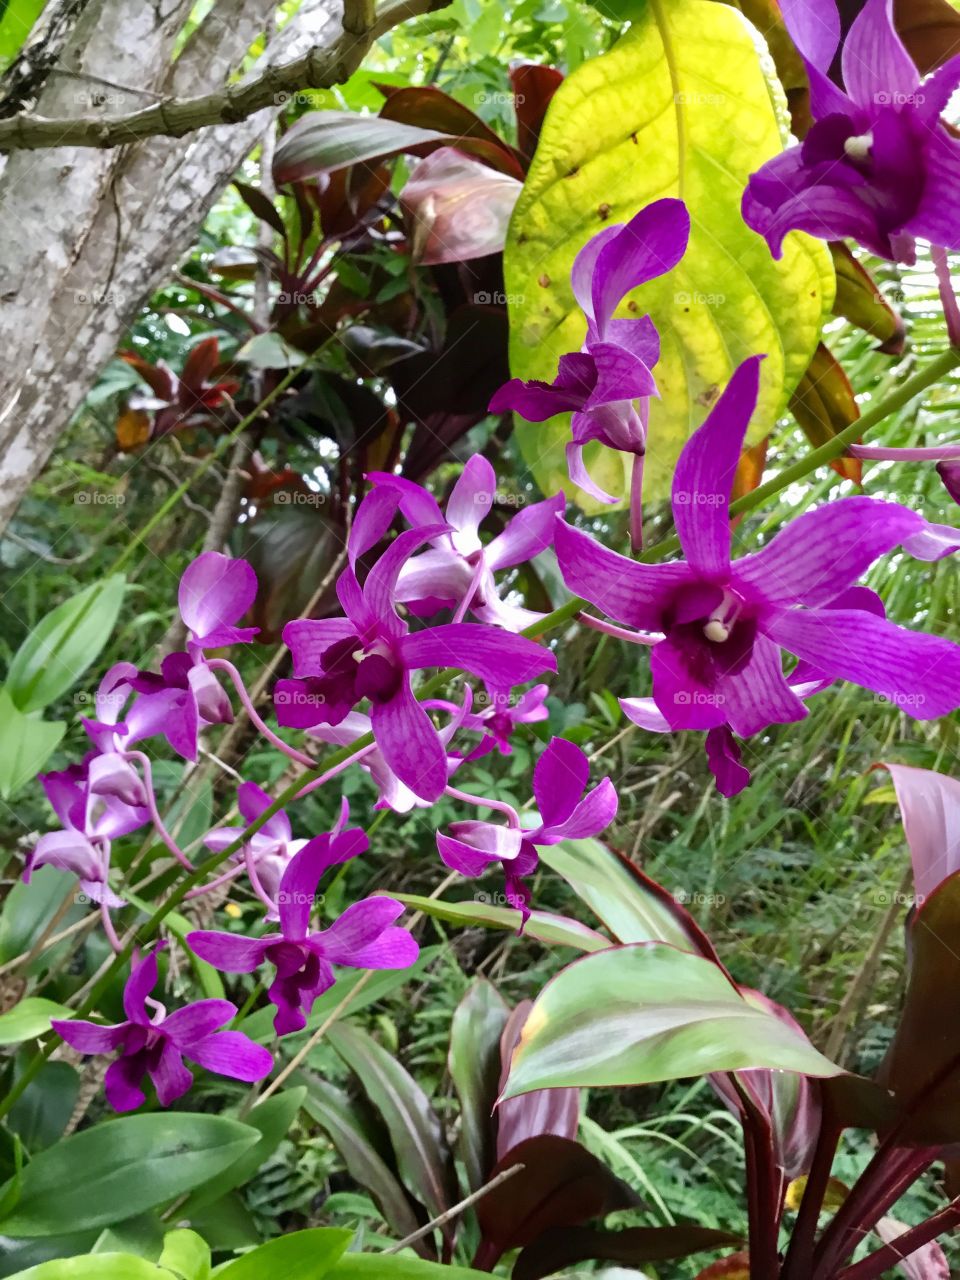 Orchids outside my door